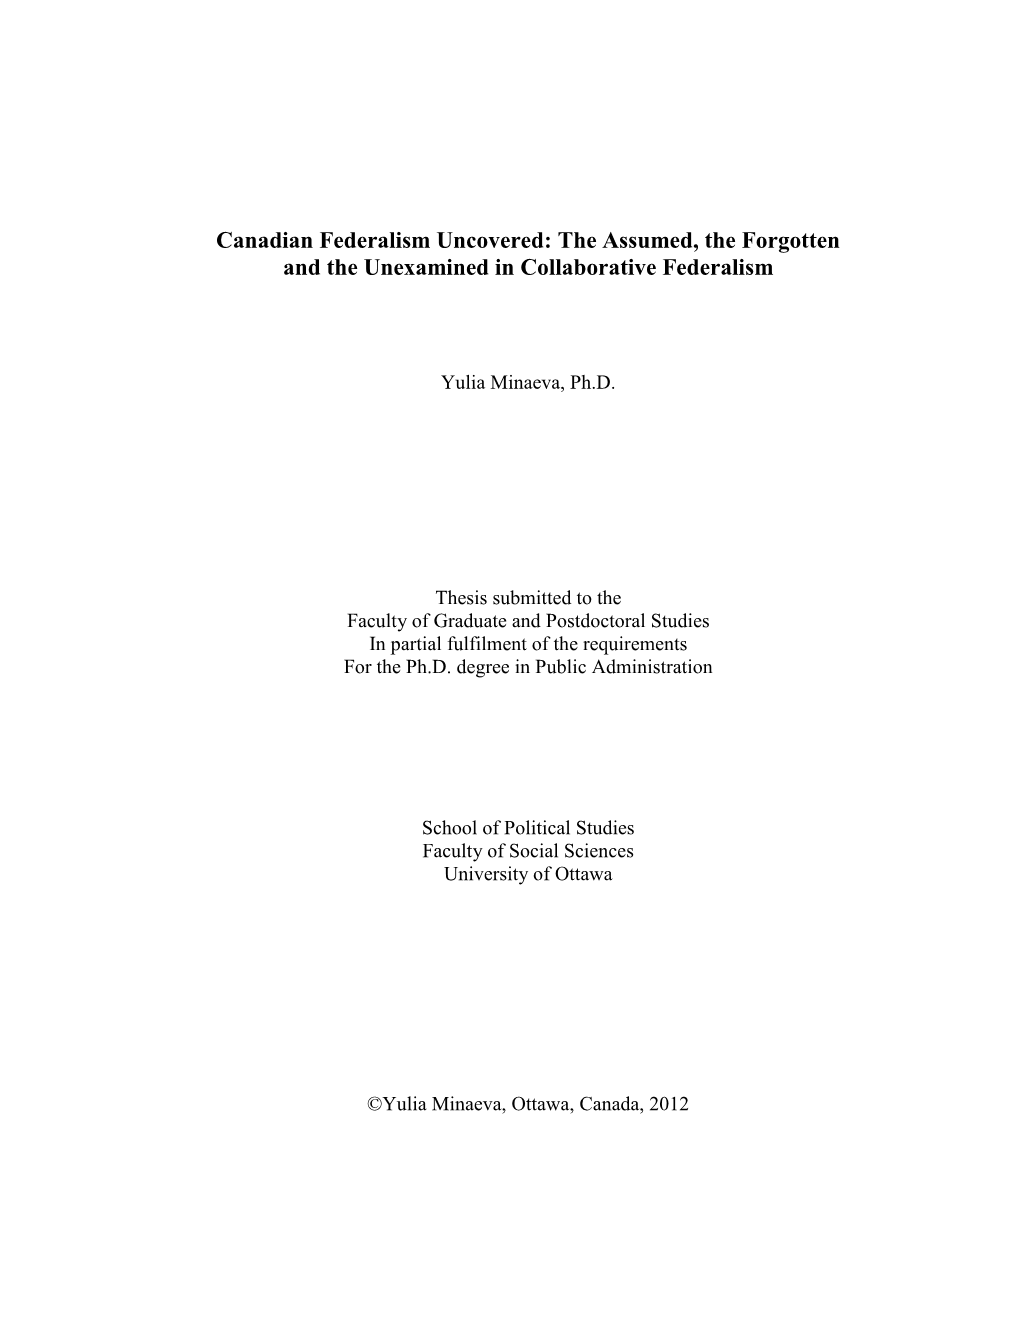 Canadian Federalism Uncovered: the Assumed, the Forgotten and the Unexamined in Collaborative Federalism